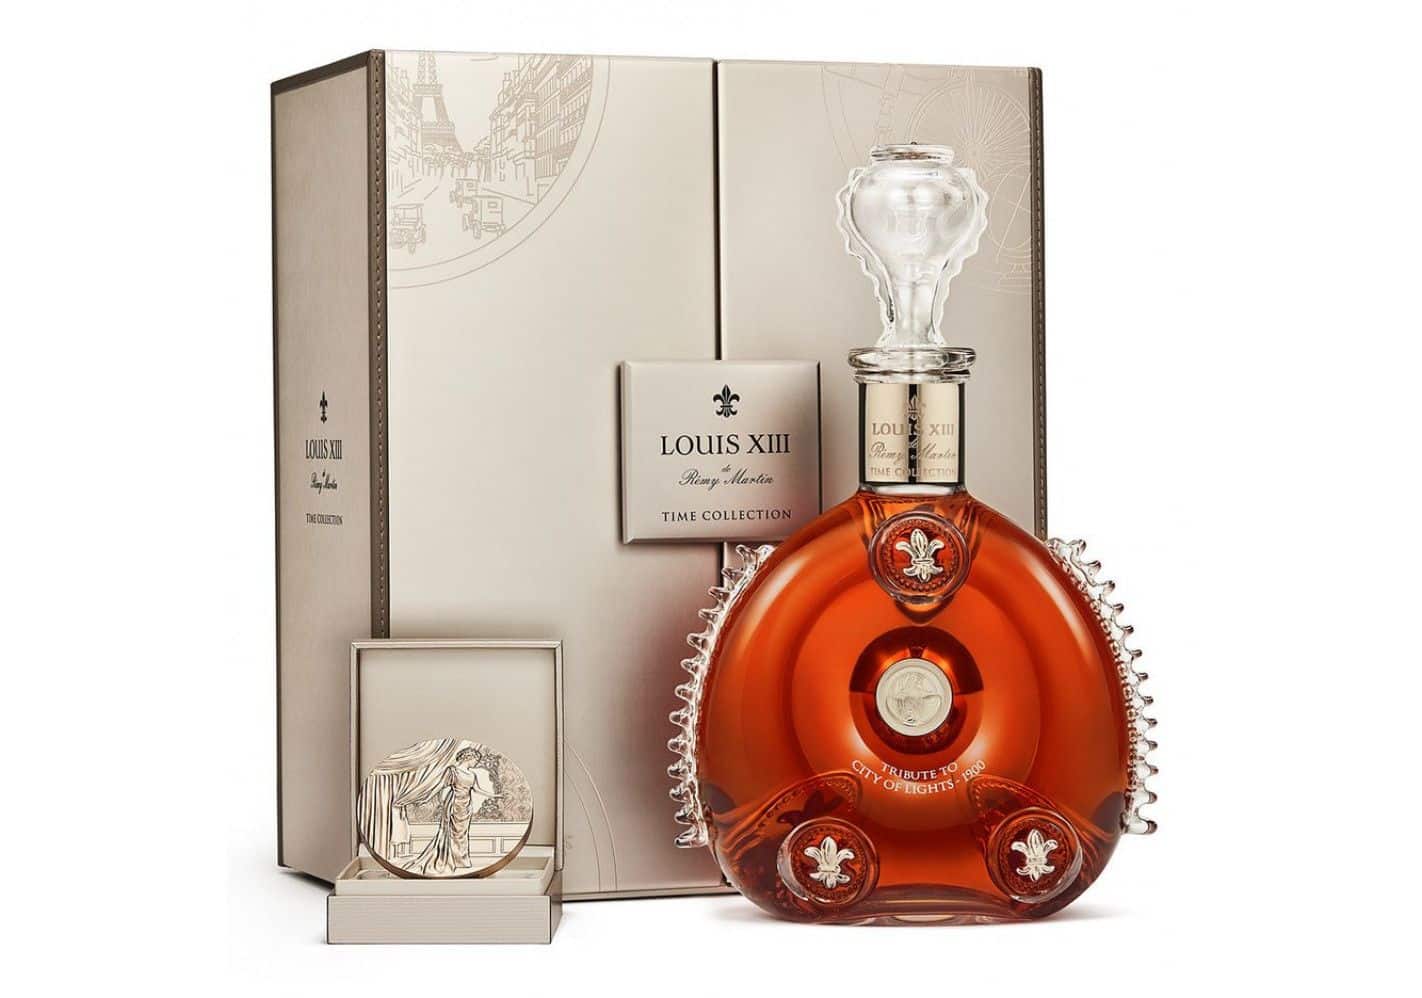 remy-martin-louis-xiii-time-collection-cognac